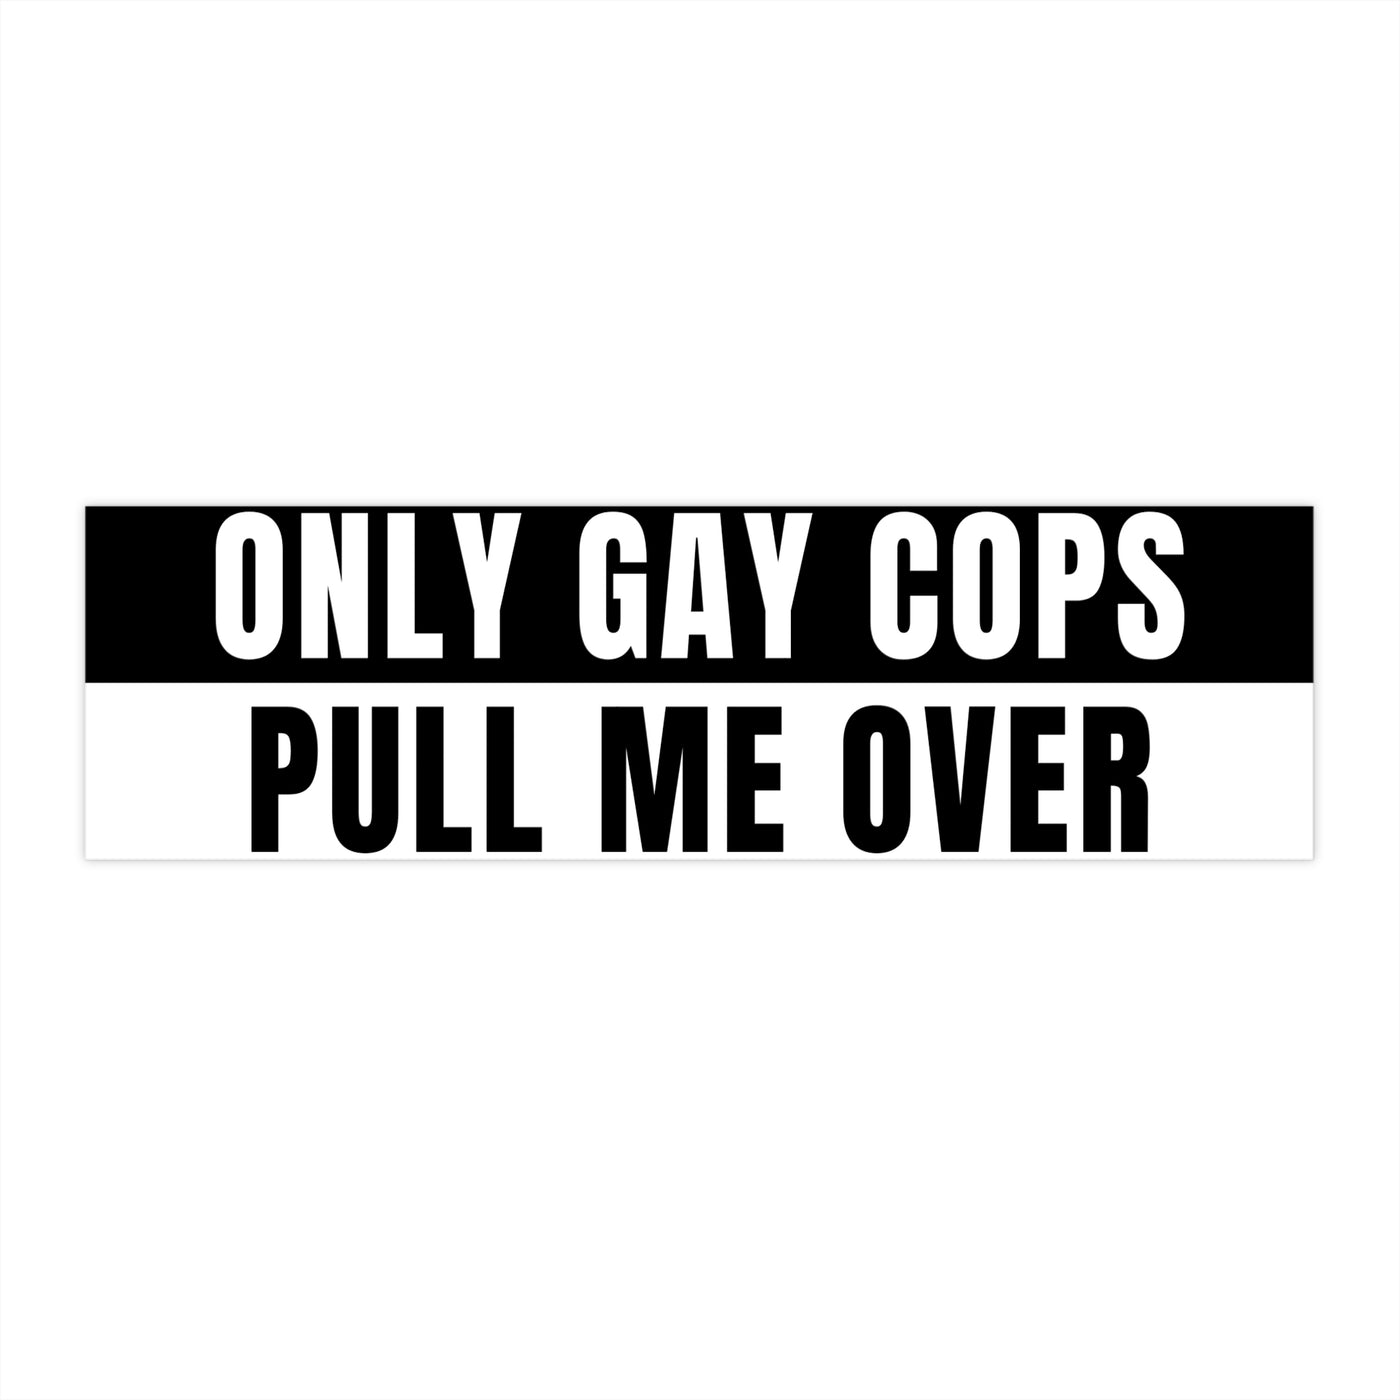 Only Gay Cops Pull Me Over